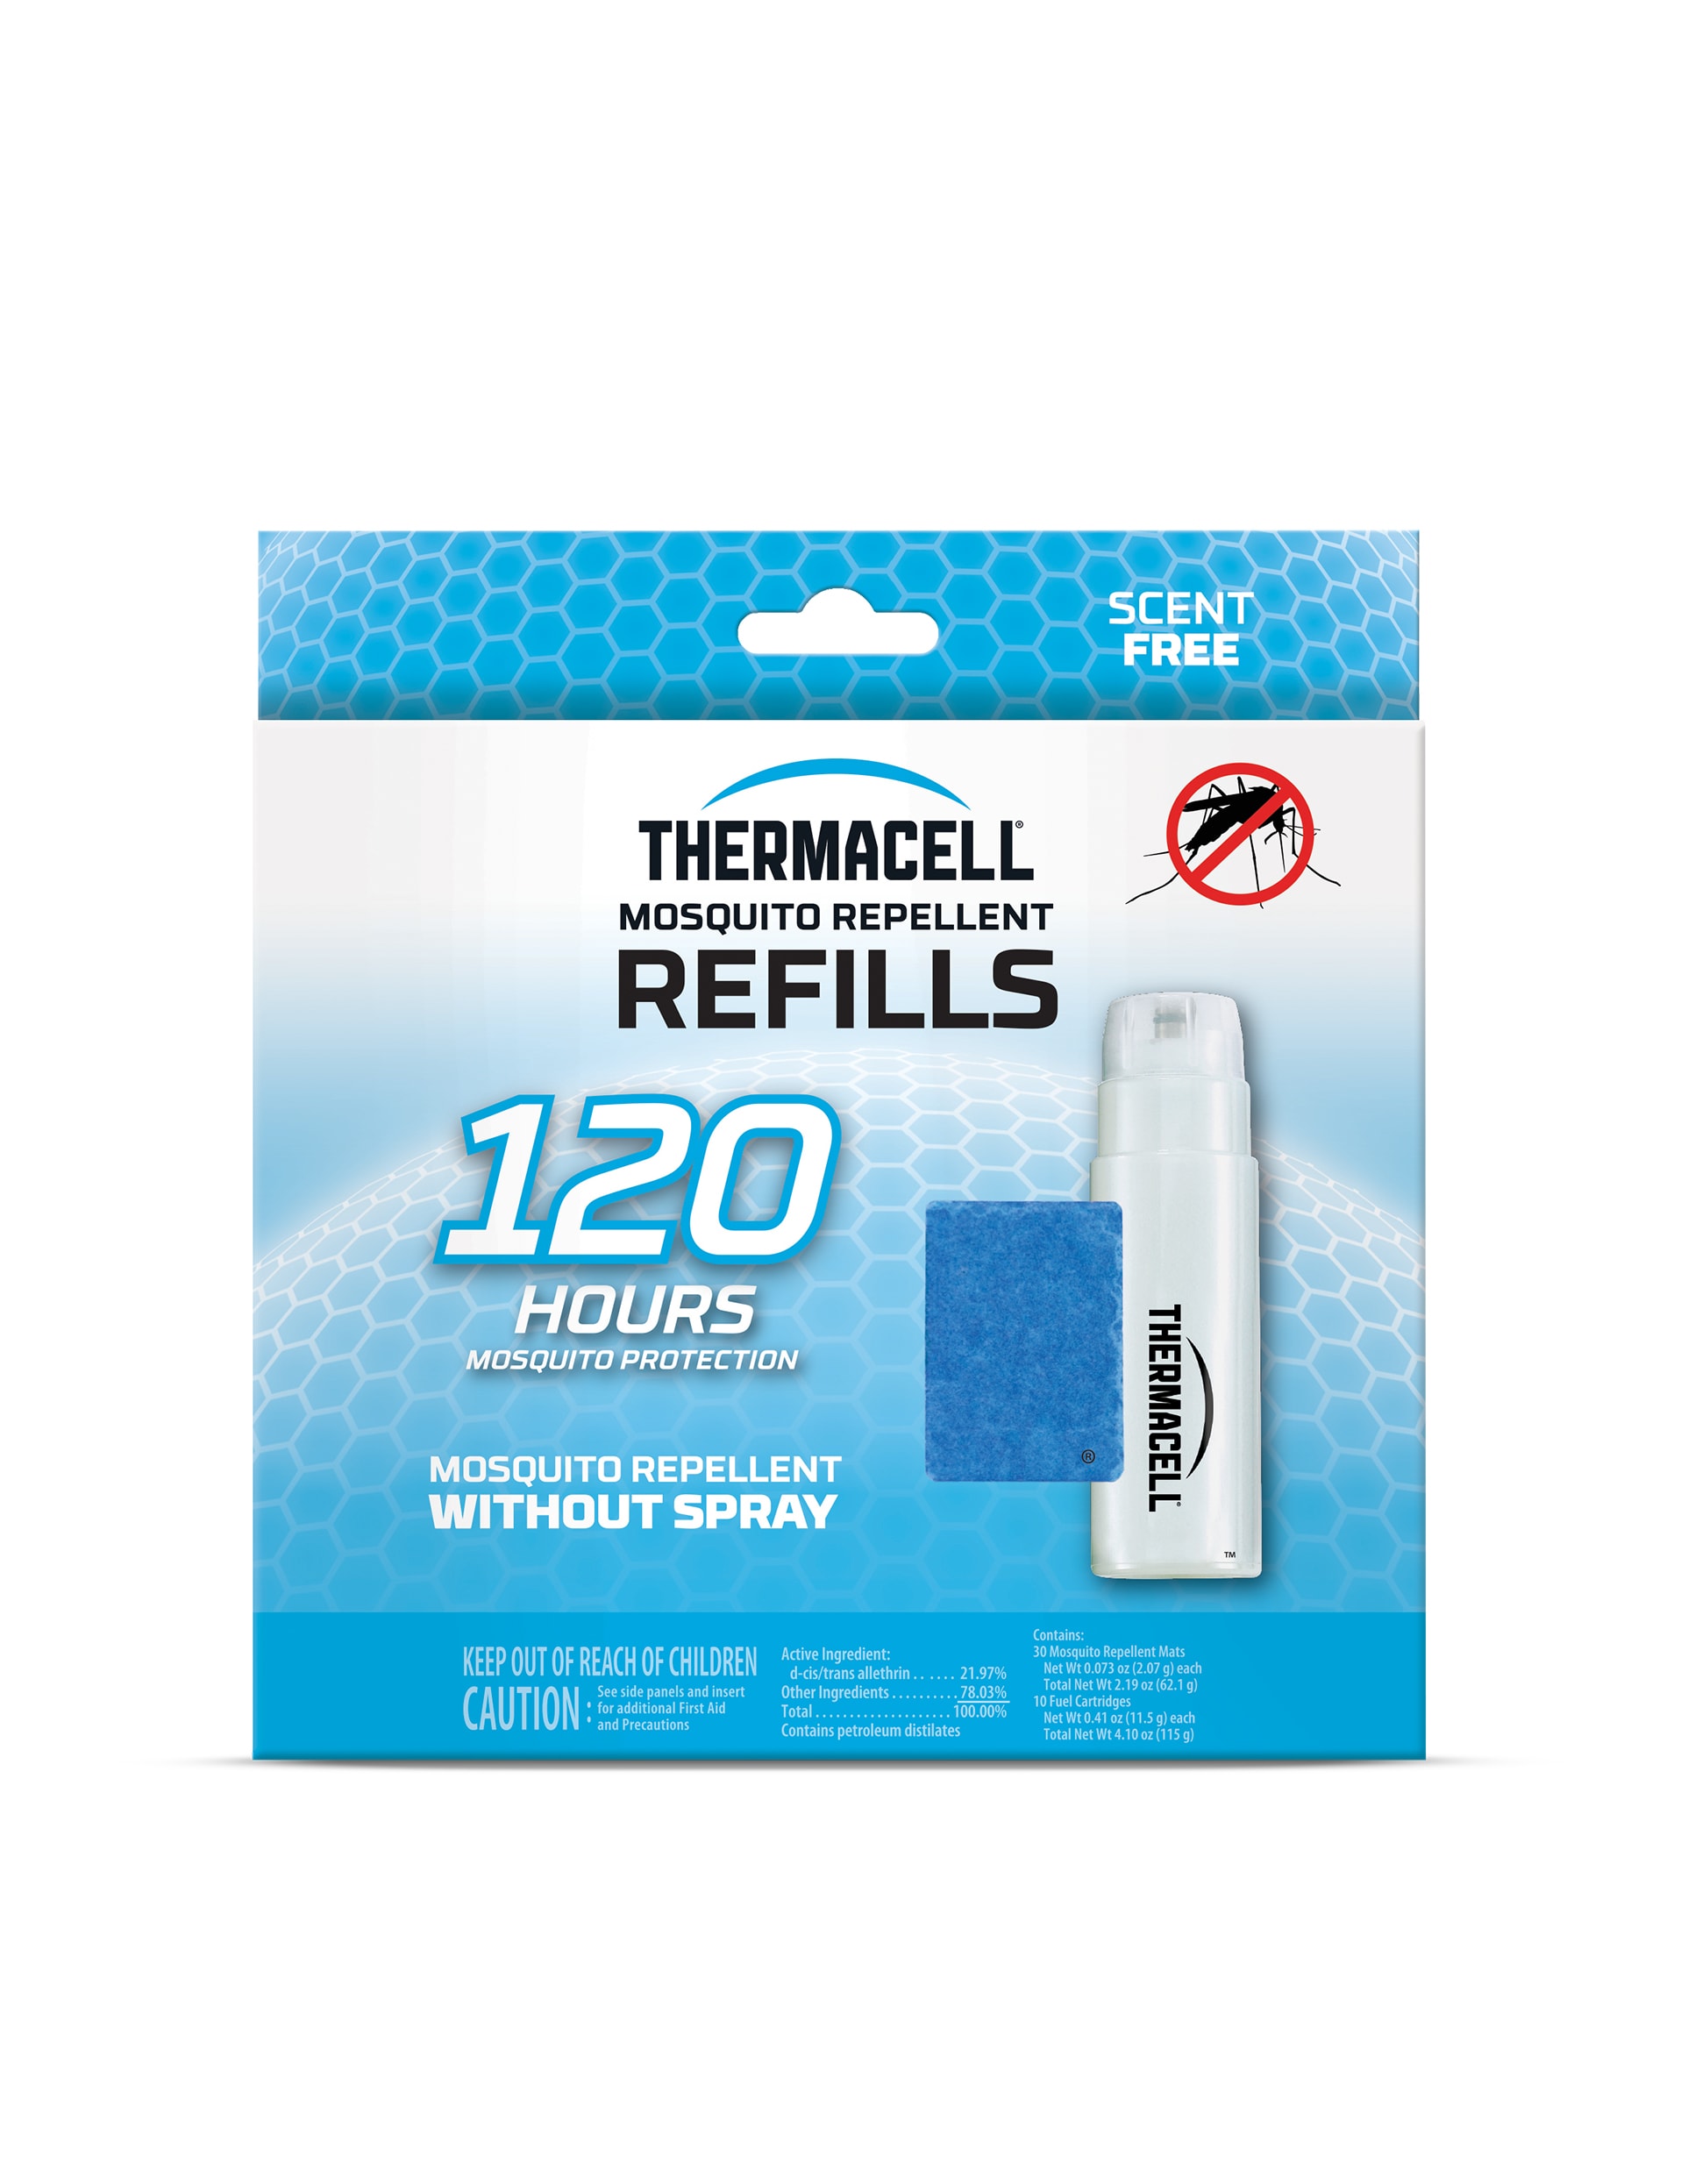  Thermacell Mosquito Repellent Refills; Earth Scent; Compatible  with Any Fuel-Powered Thermacell Repeller; Highly Effective, Long Lasting,  No Spray or Mess; 15 Foot Zone of Mosquito Protection : Thermacell: Patio,  Lawn 